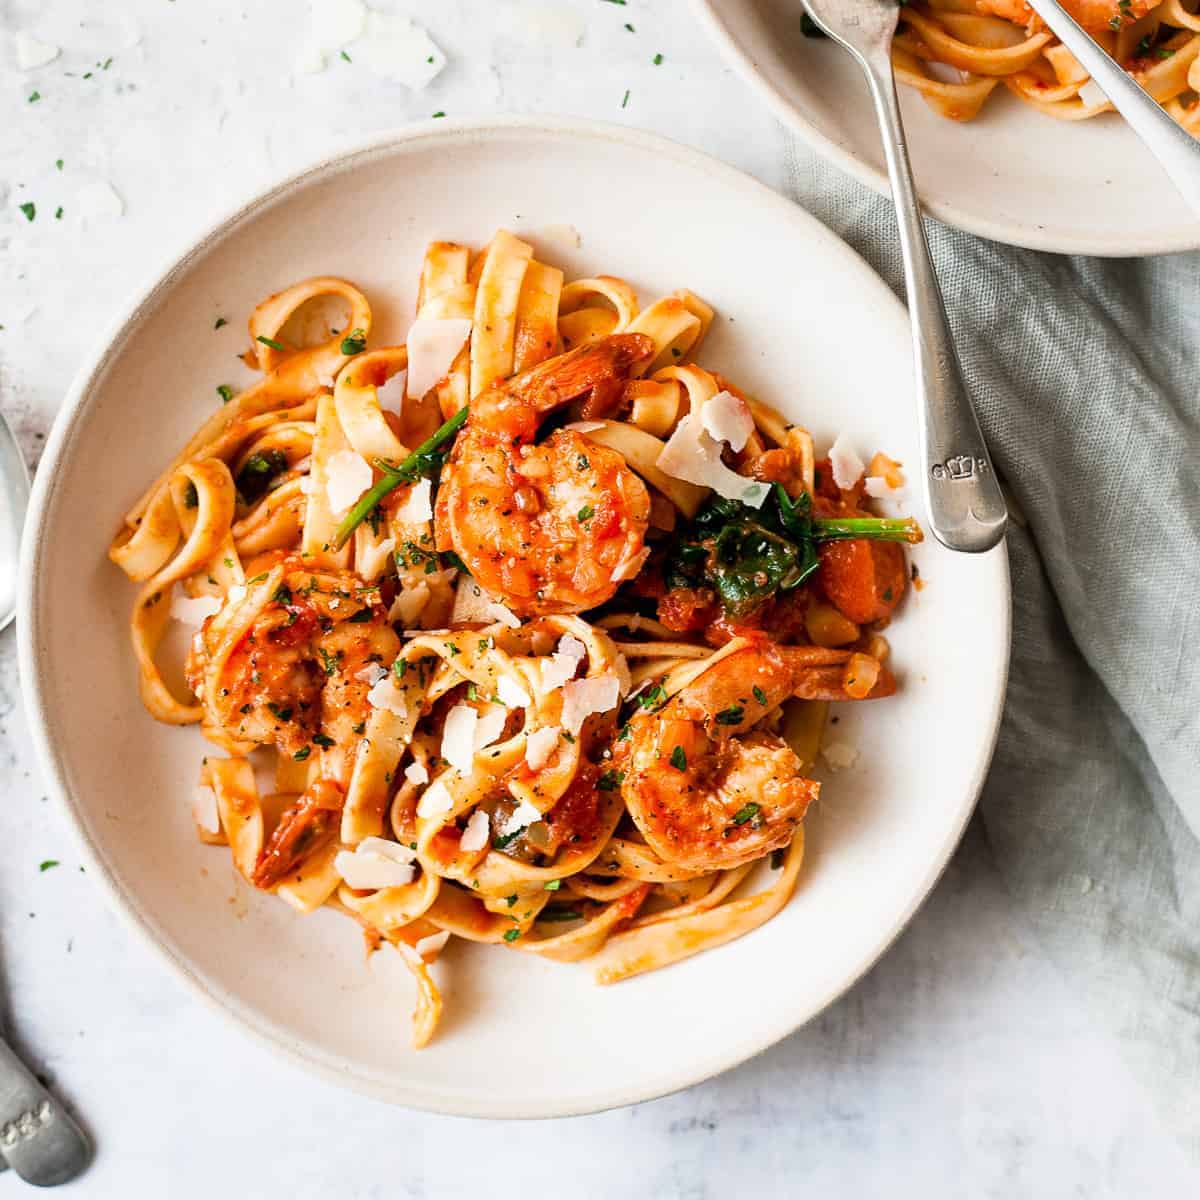 Prawn pasta in a white bowl with spinach and tomato sauce.